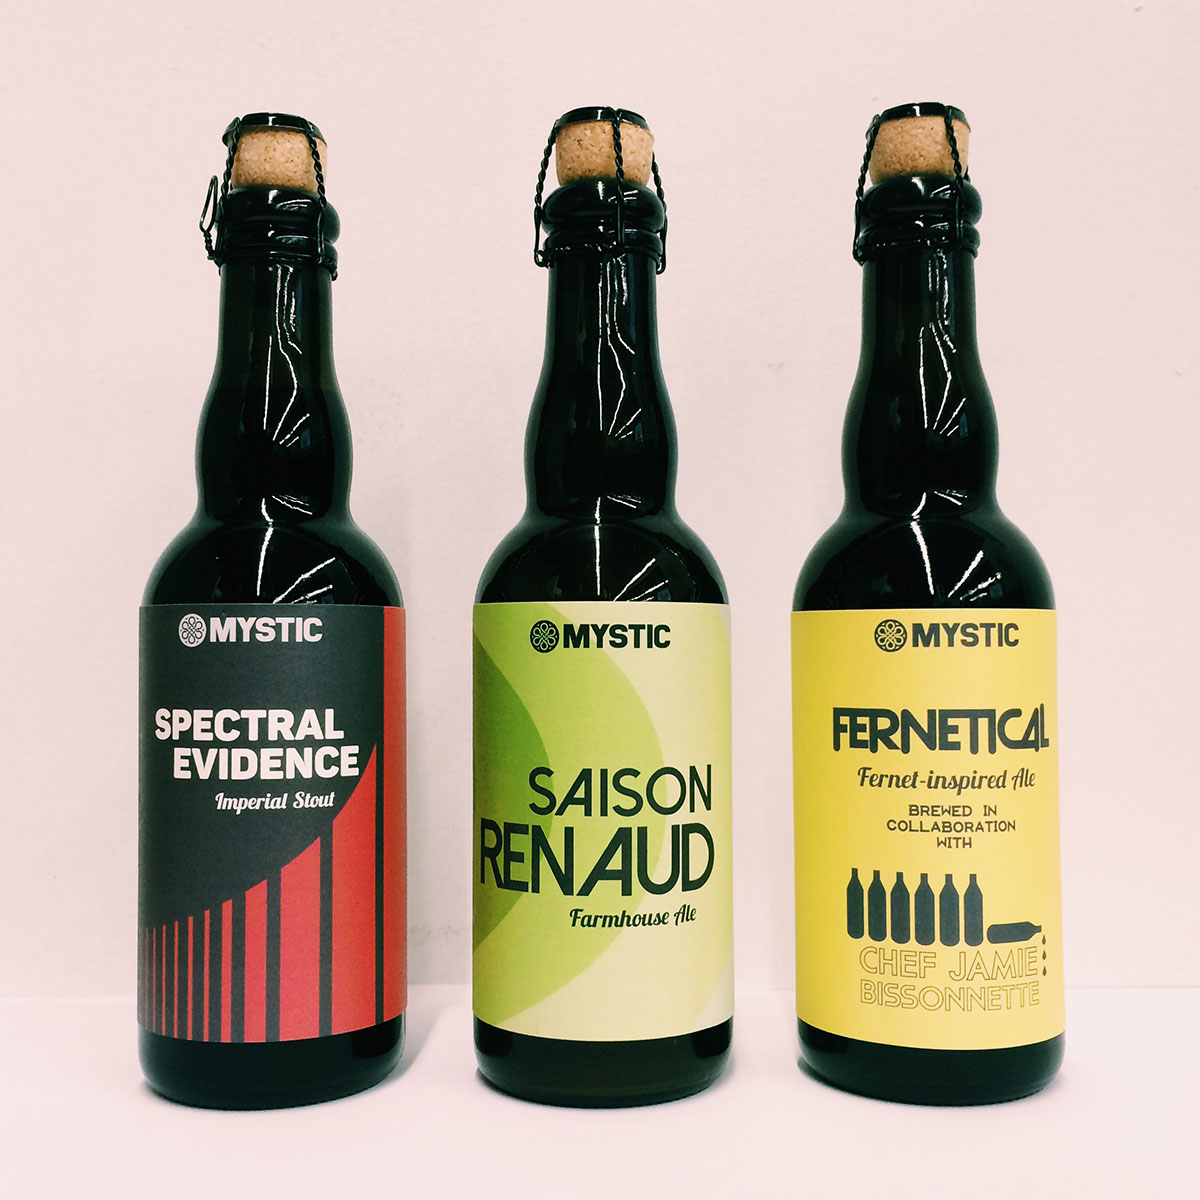 Bottles from Mystic Brewing.